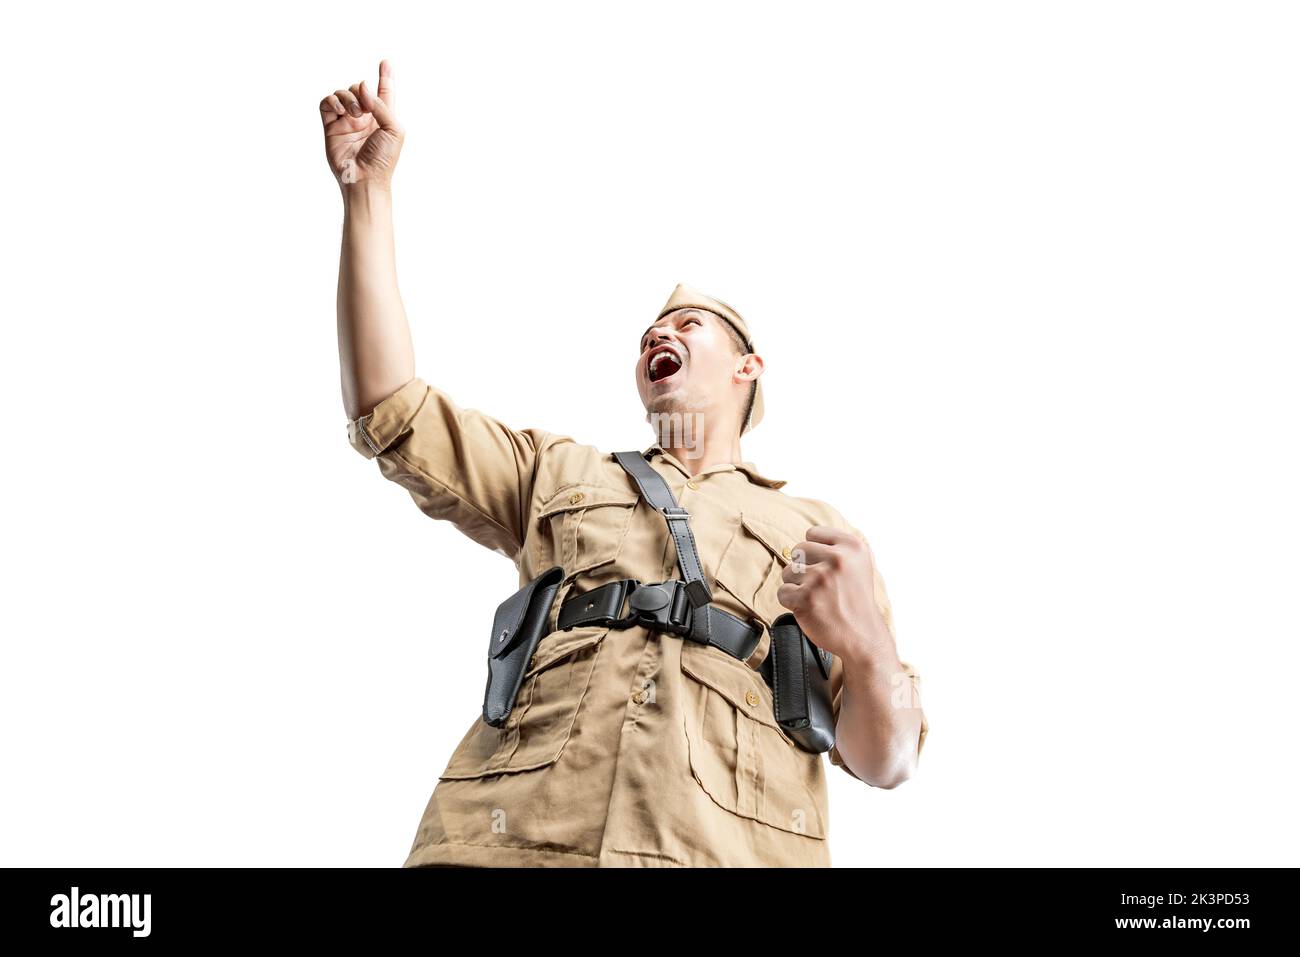 Indonesian warrior standing with excited expression isolated over white background Stock Photo